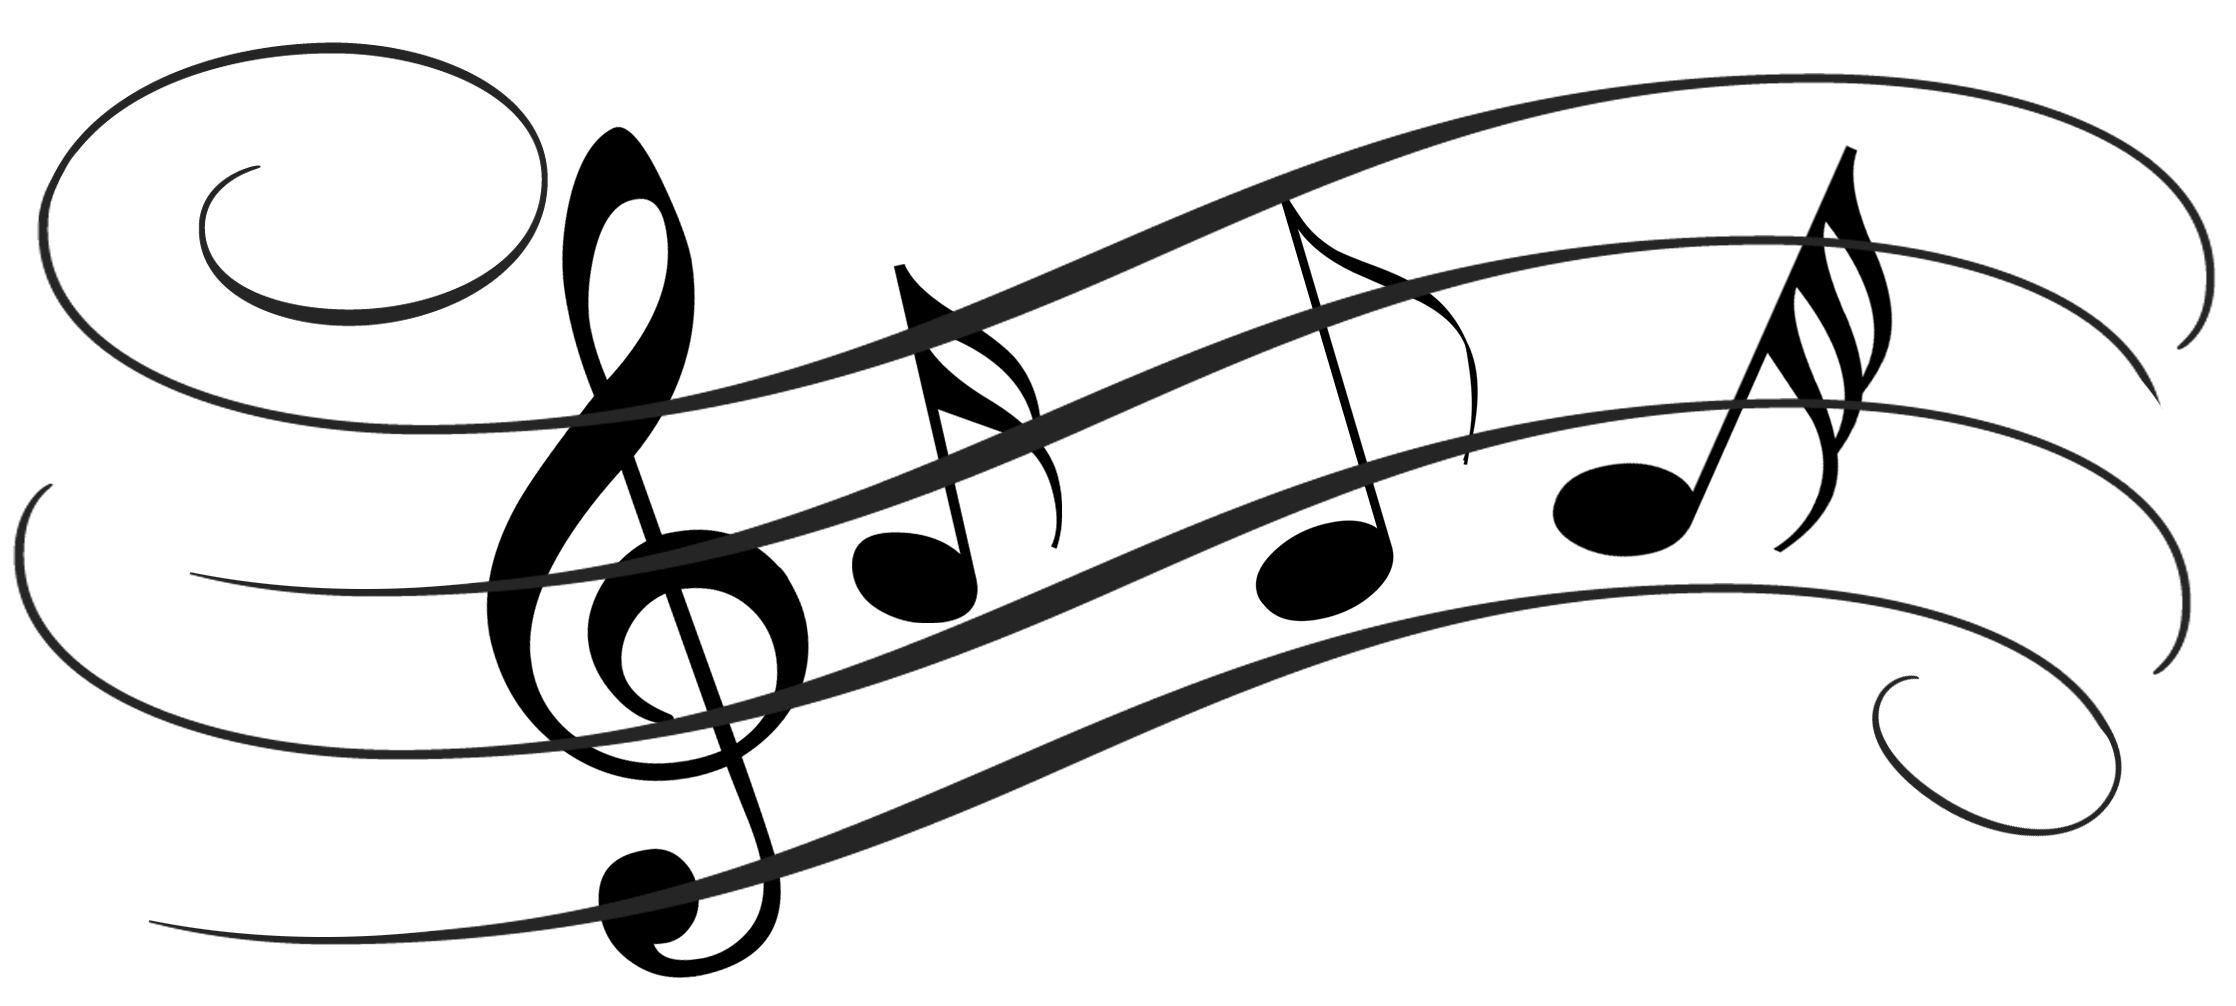 Music staff music notes on staff clipart free images